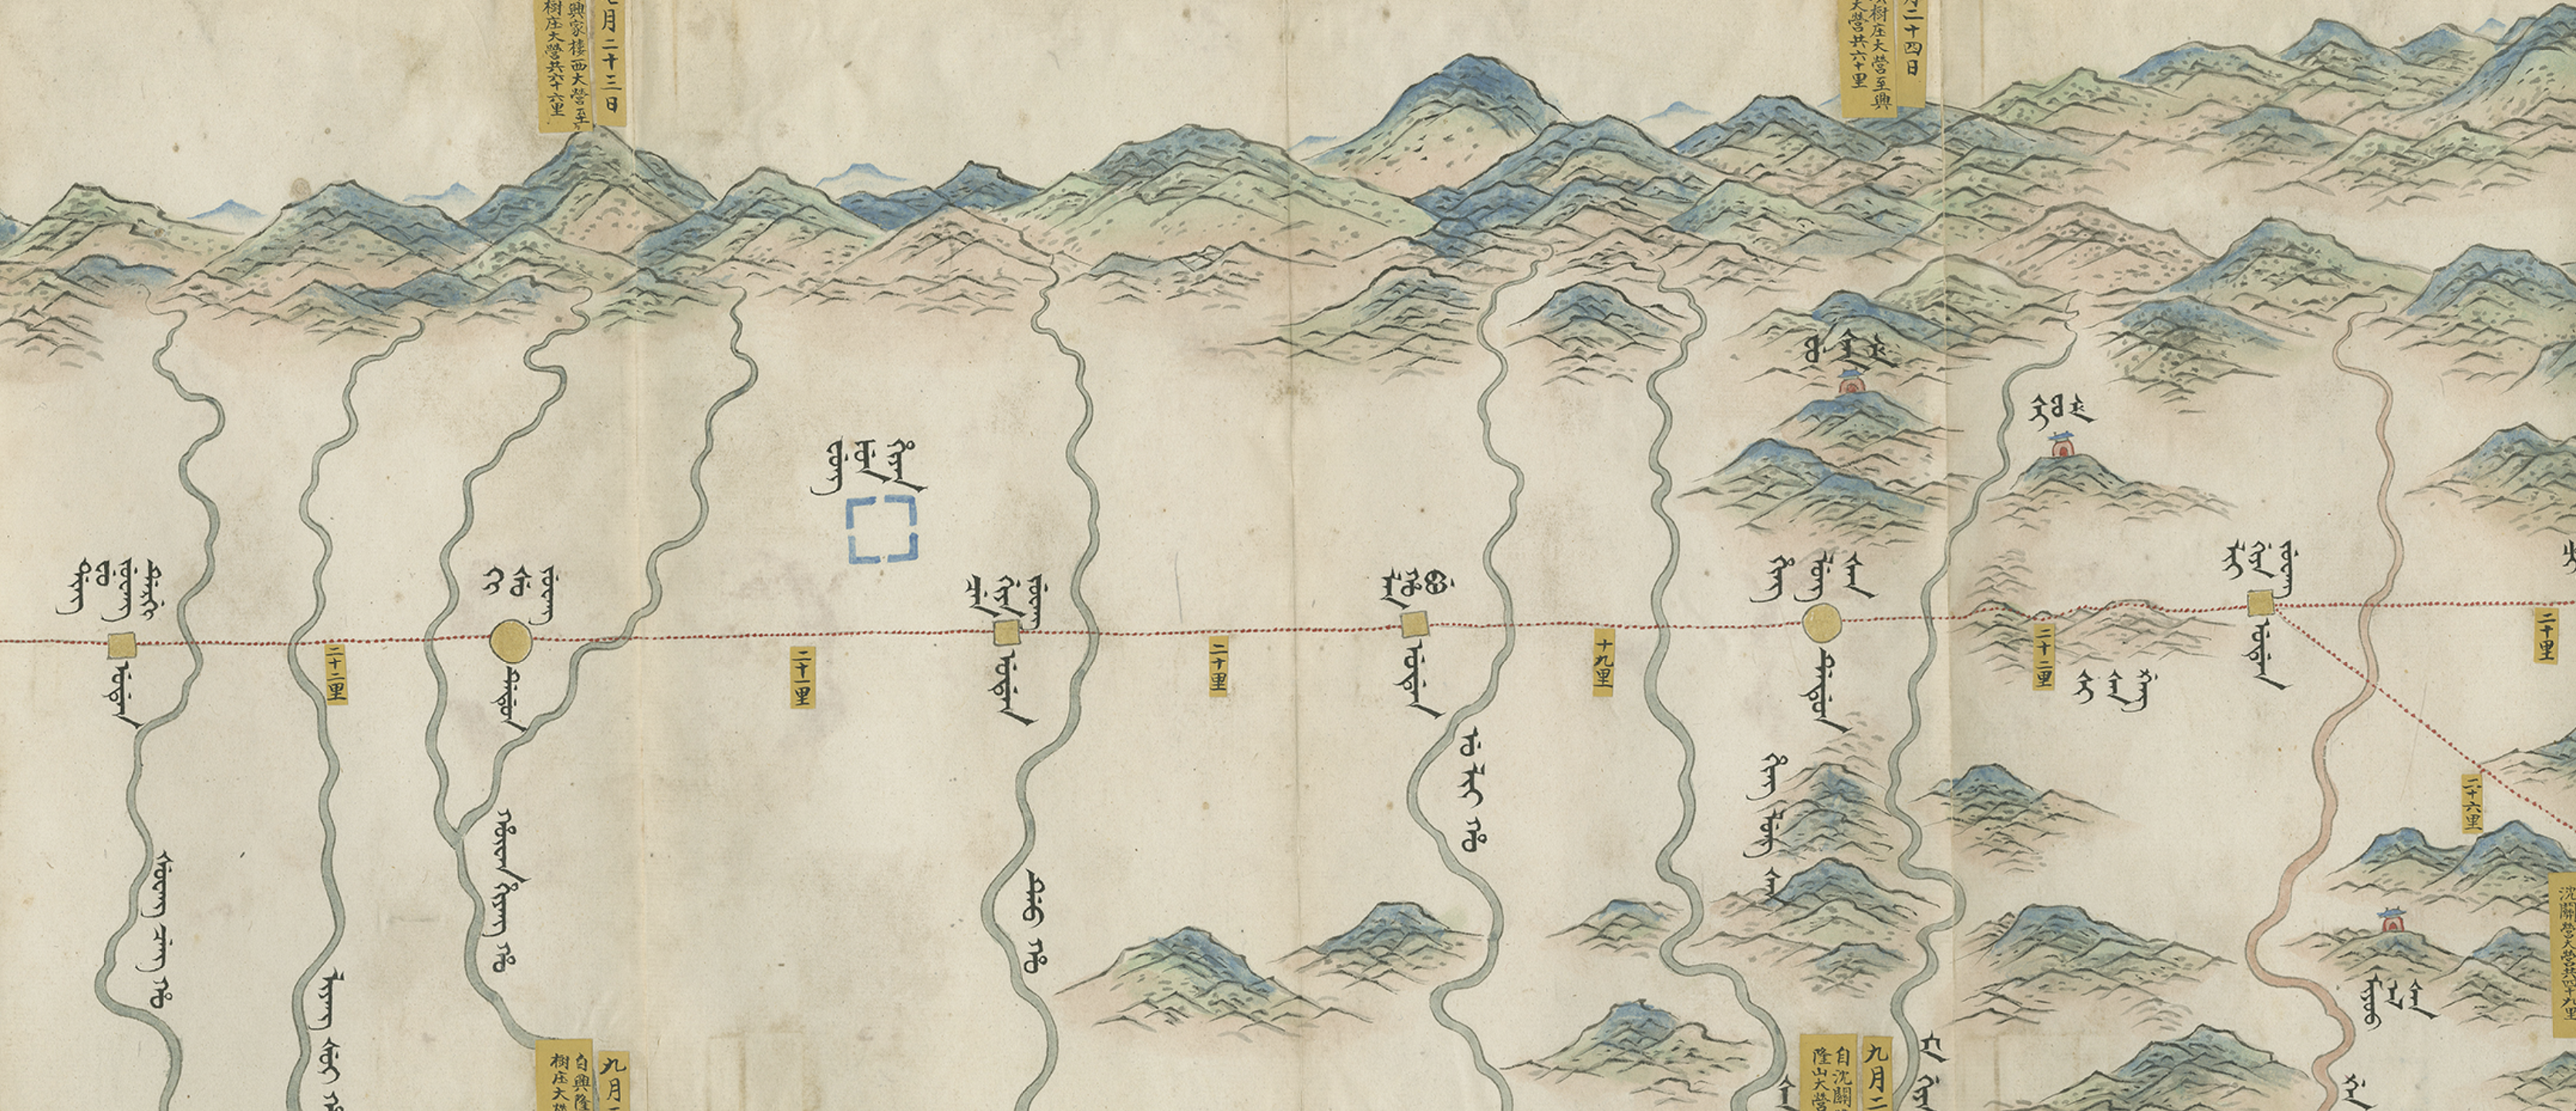 A Qing Dynasty Imperial Route Map